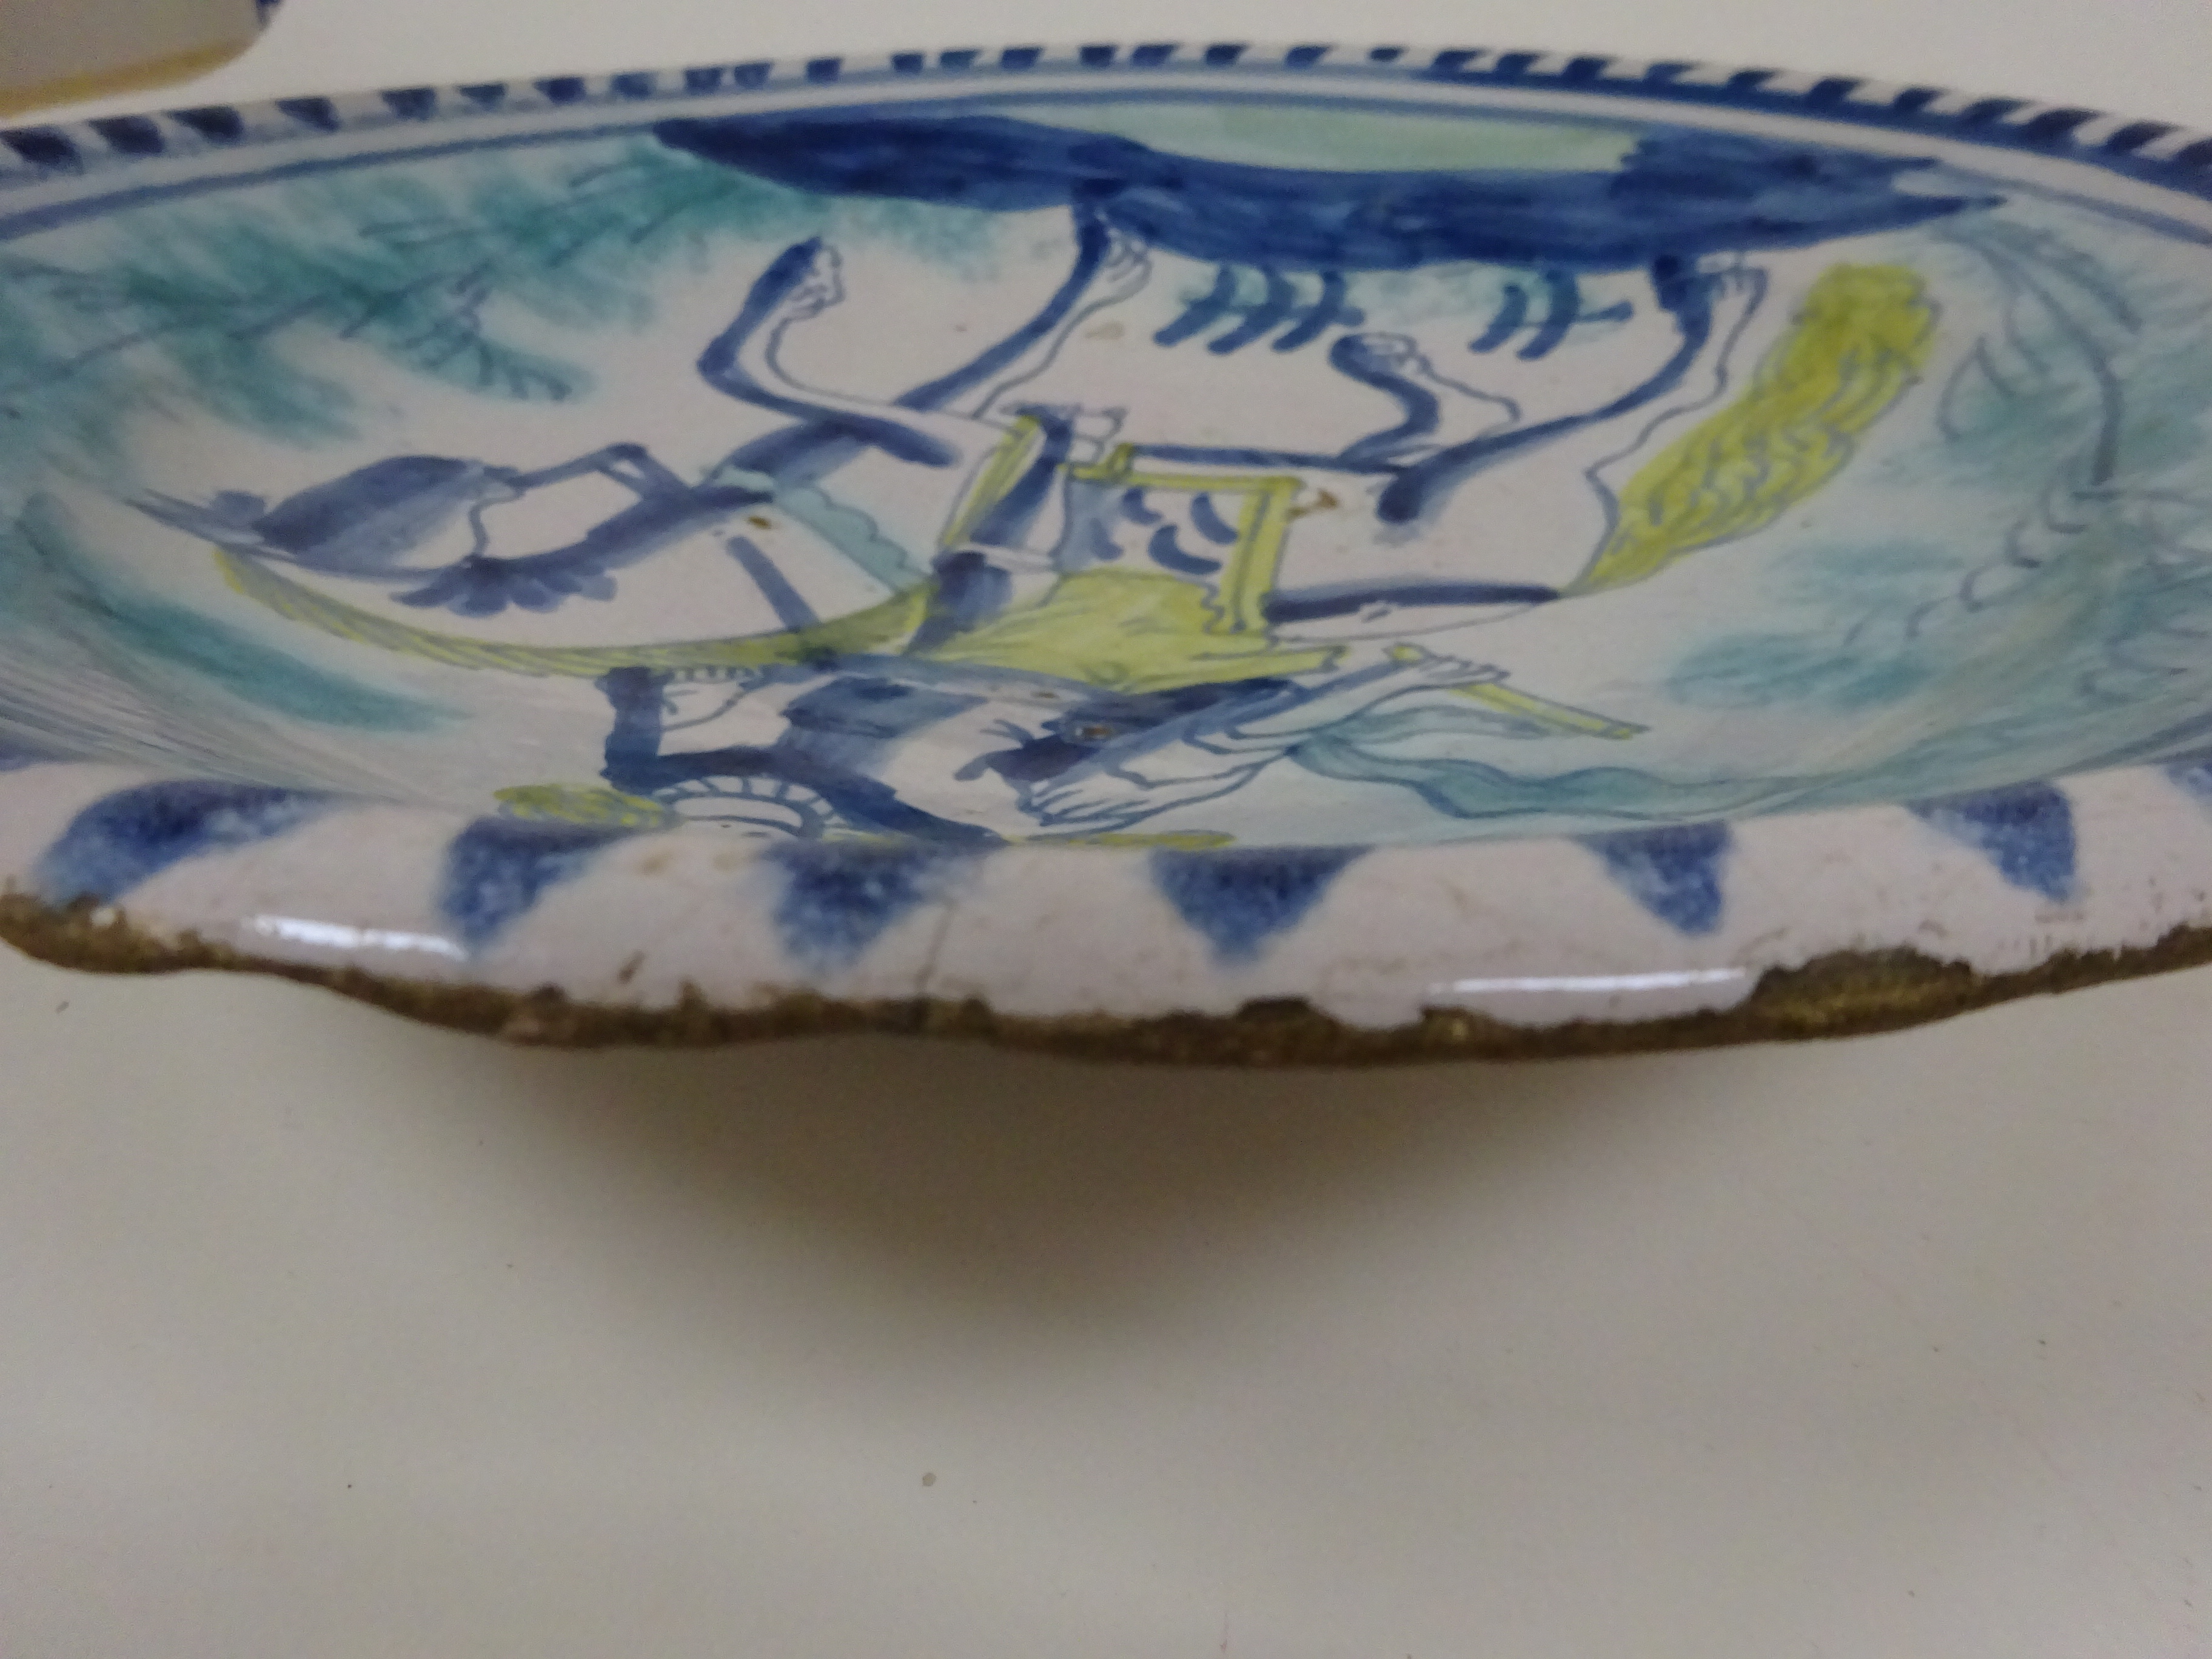 A DELFTWARE POTTERY EQUESTRIAN CHARGER PROBABLY LONDON, C.1700 painted in blue, green and yellow - Image 13 of 21